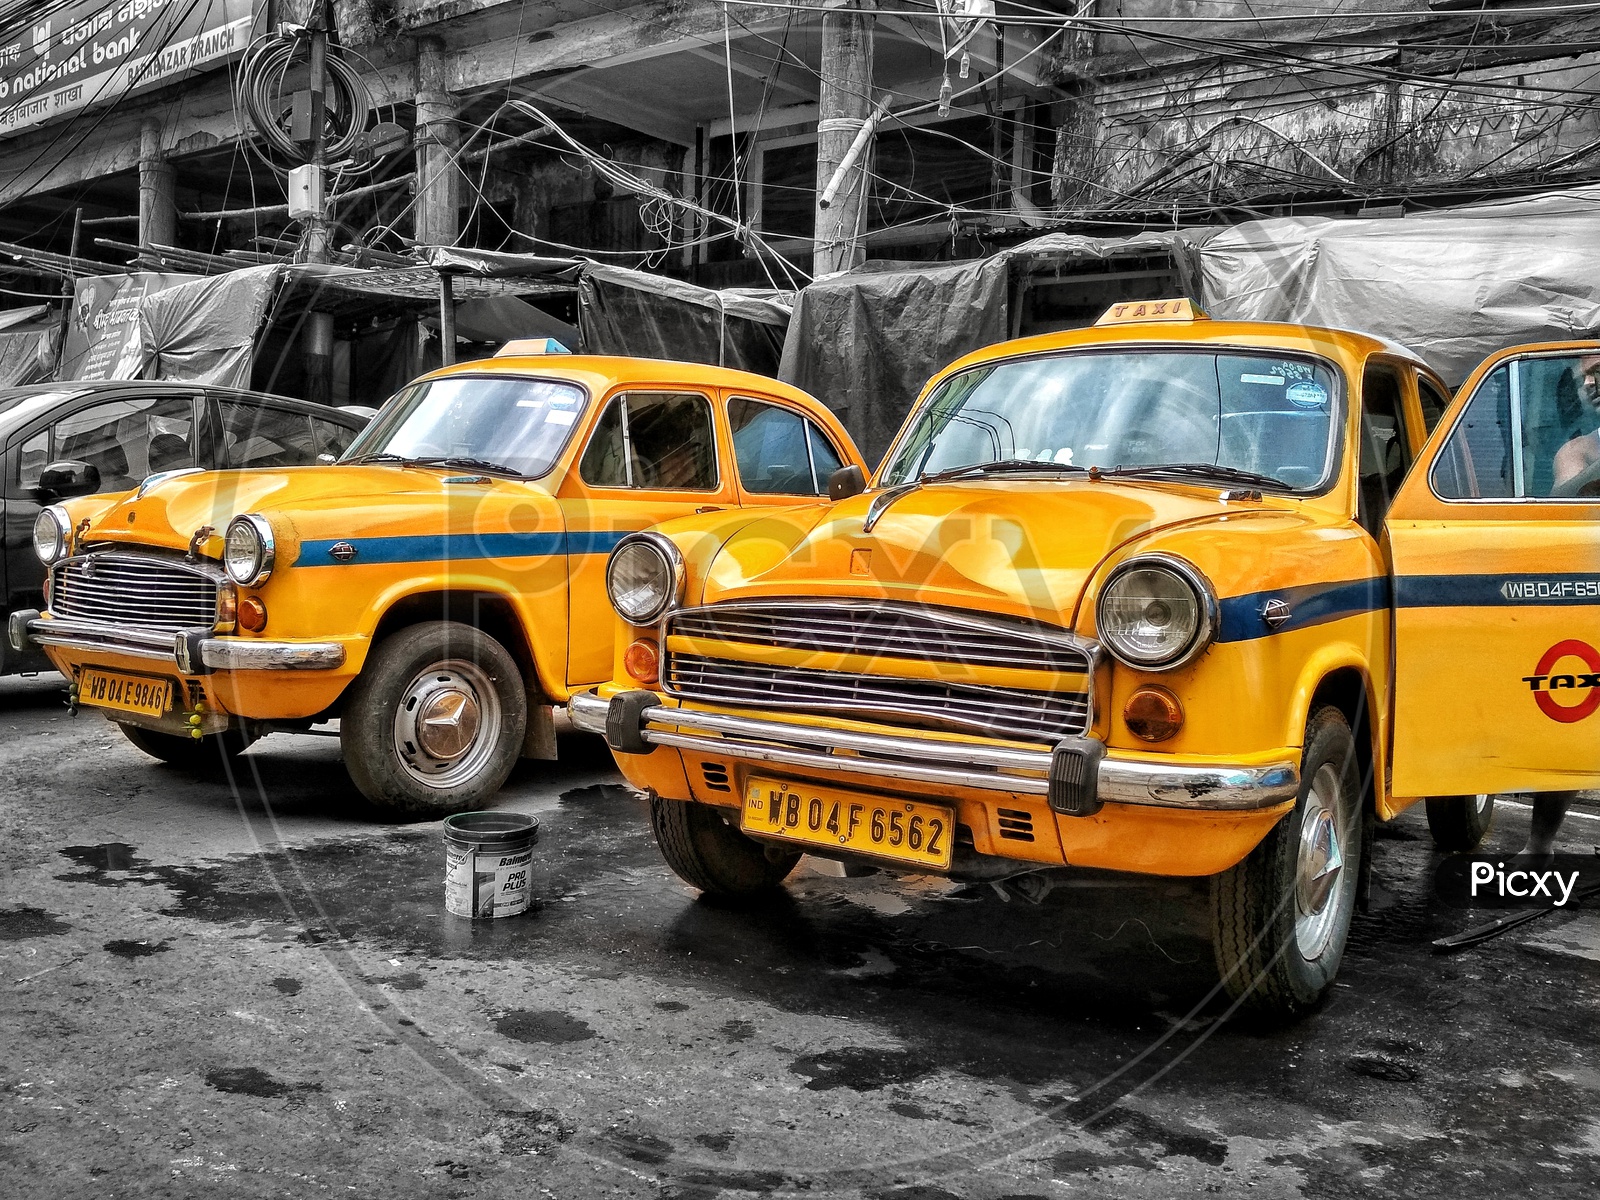 Yellow taxis